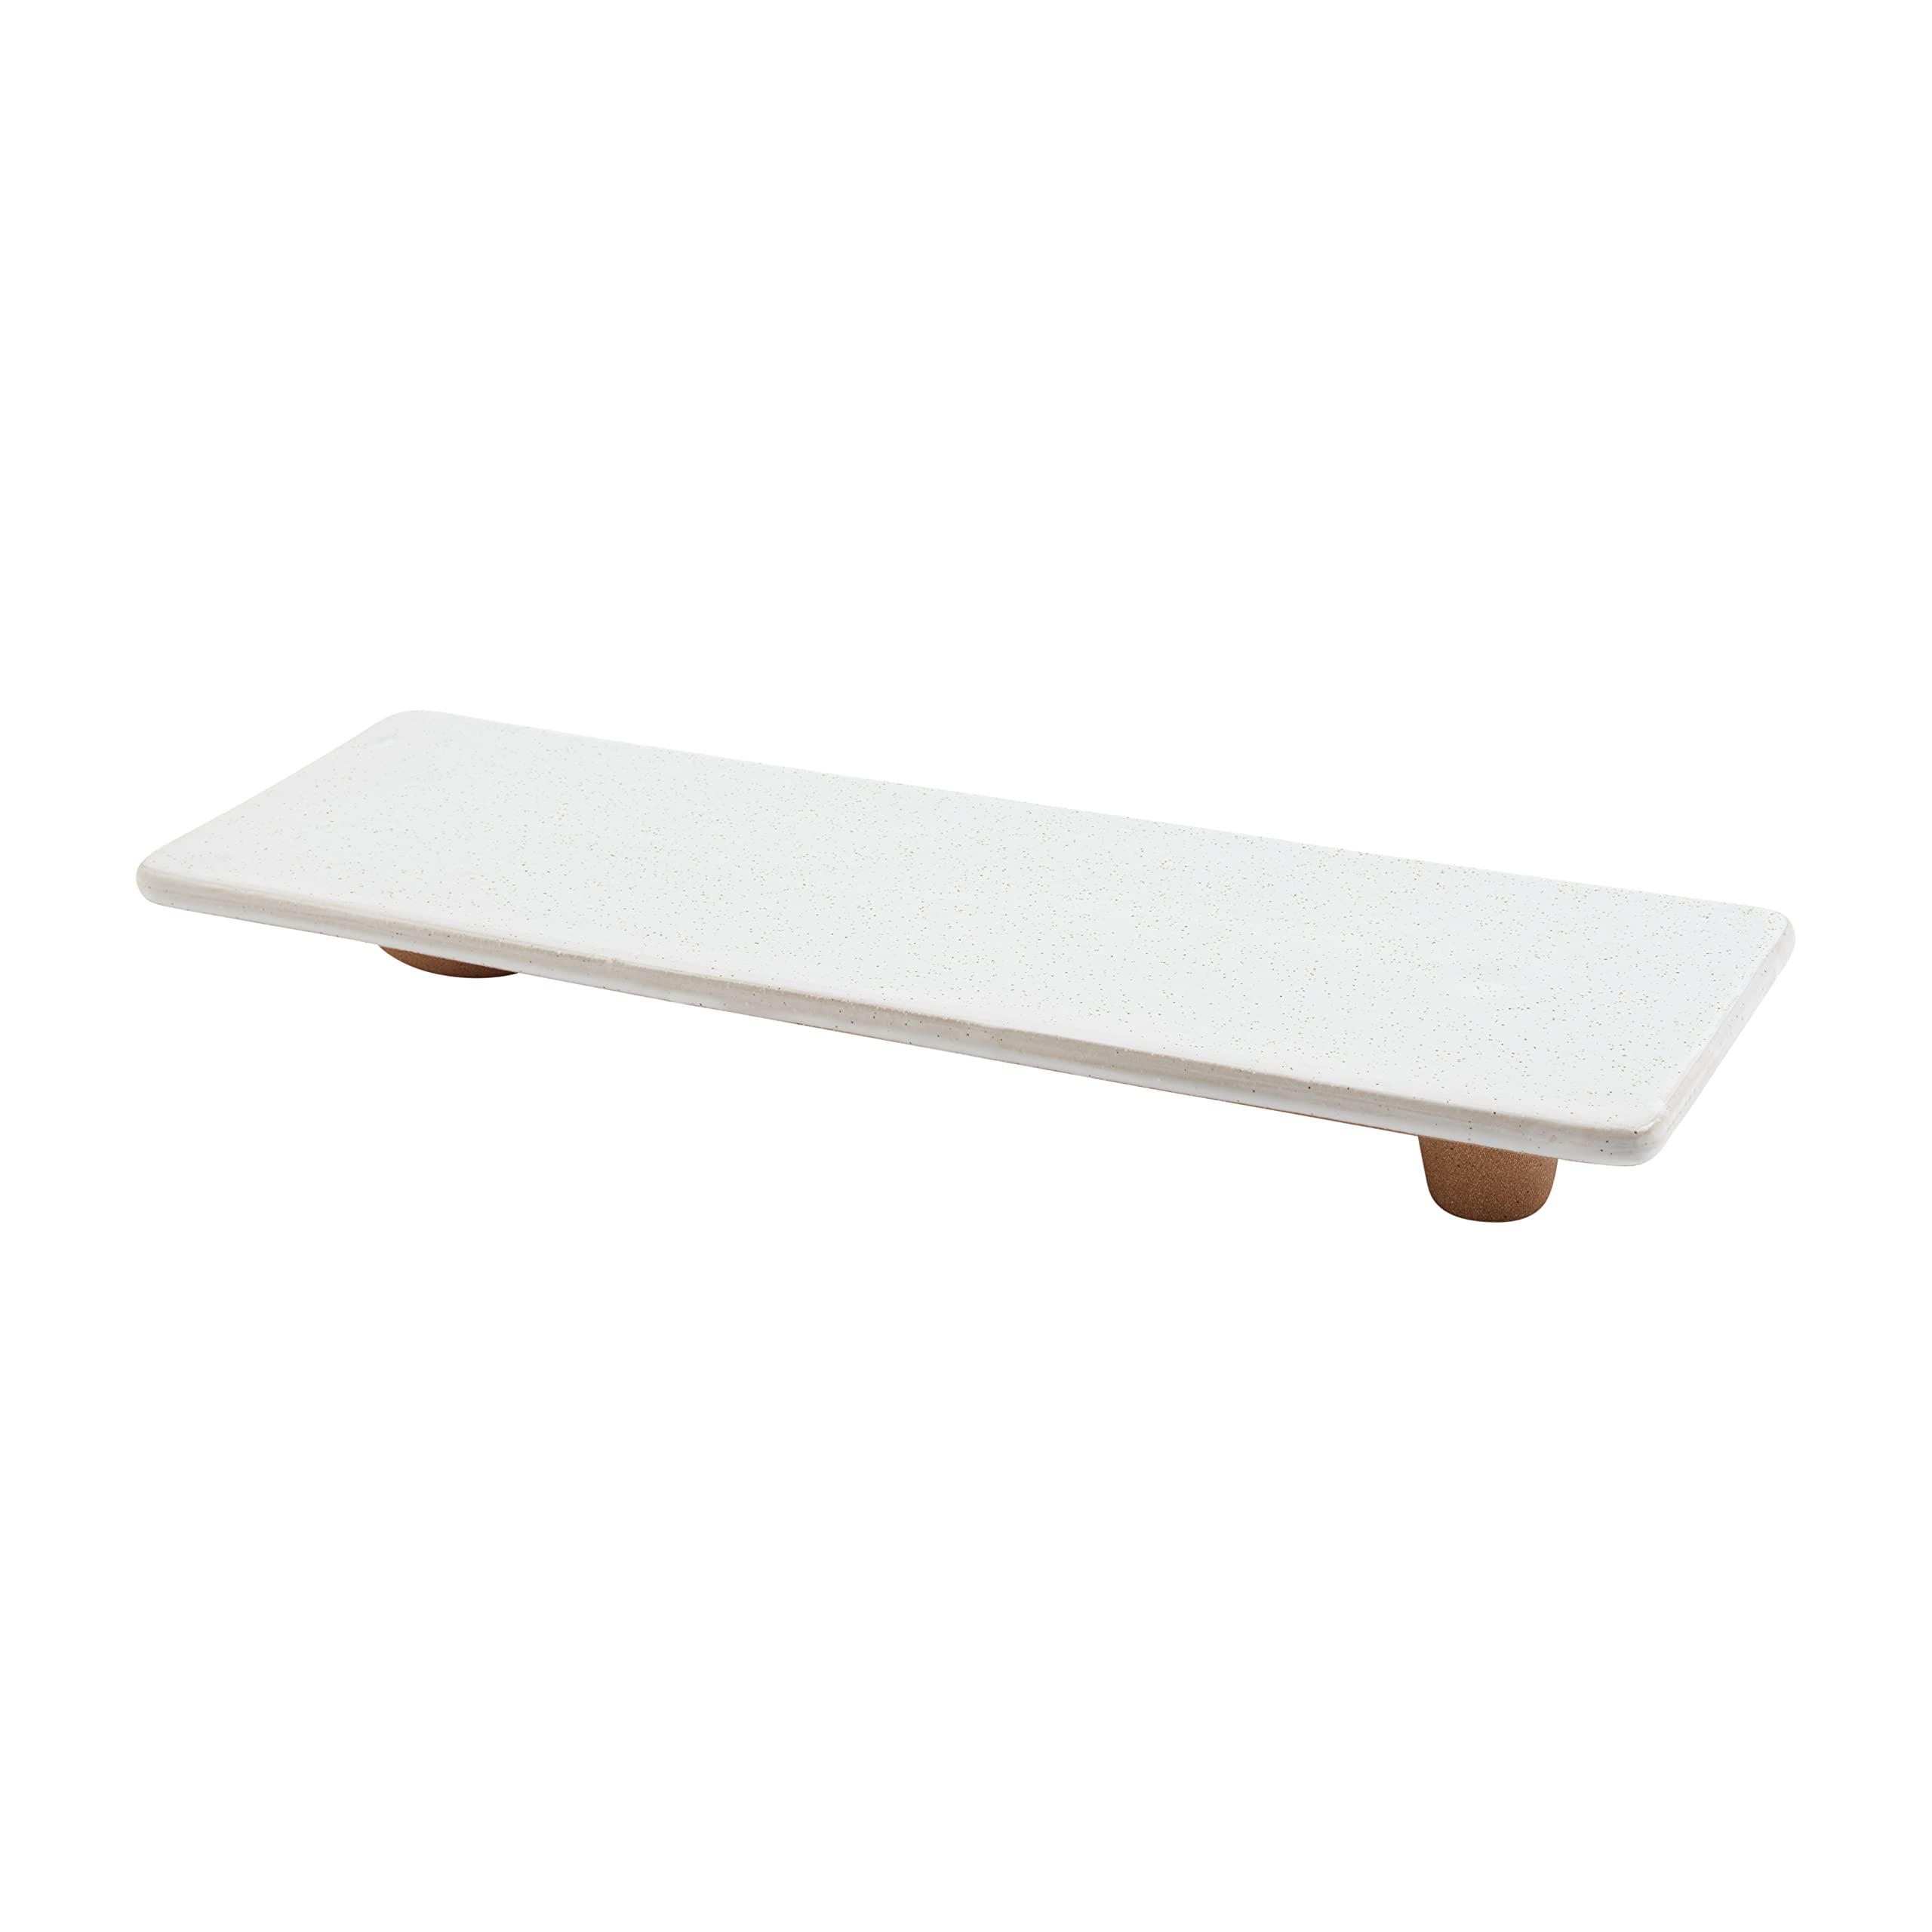 Mud Pie Terracotta Footed Tray, 5 3/4" X 17"